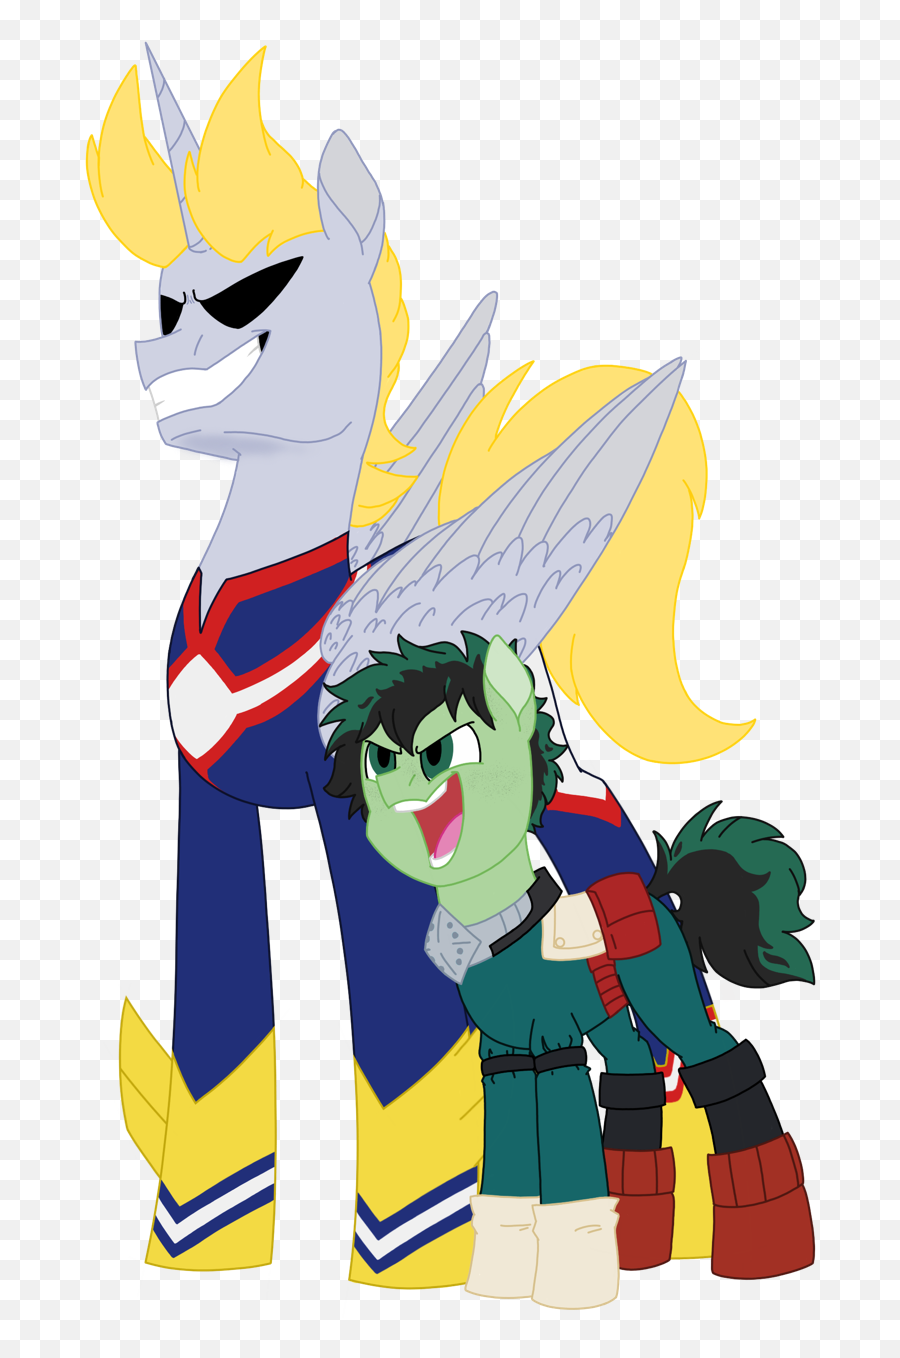 1833250 - Alicorn All Might All Mightu0027s Hero Costume All Might Mlp Emoji,All Might Transparent